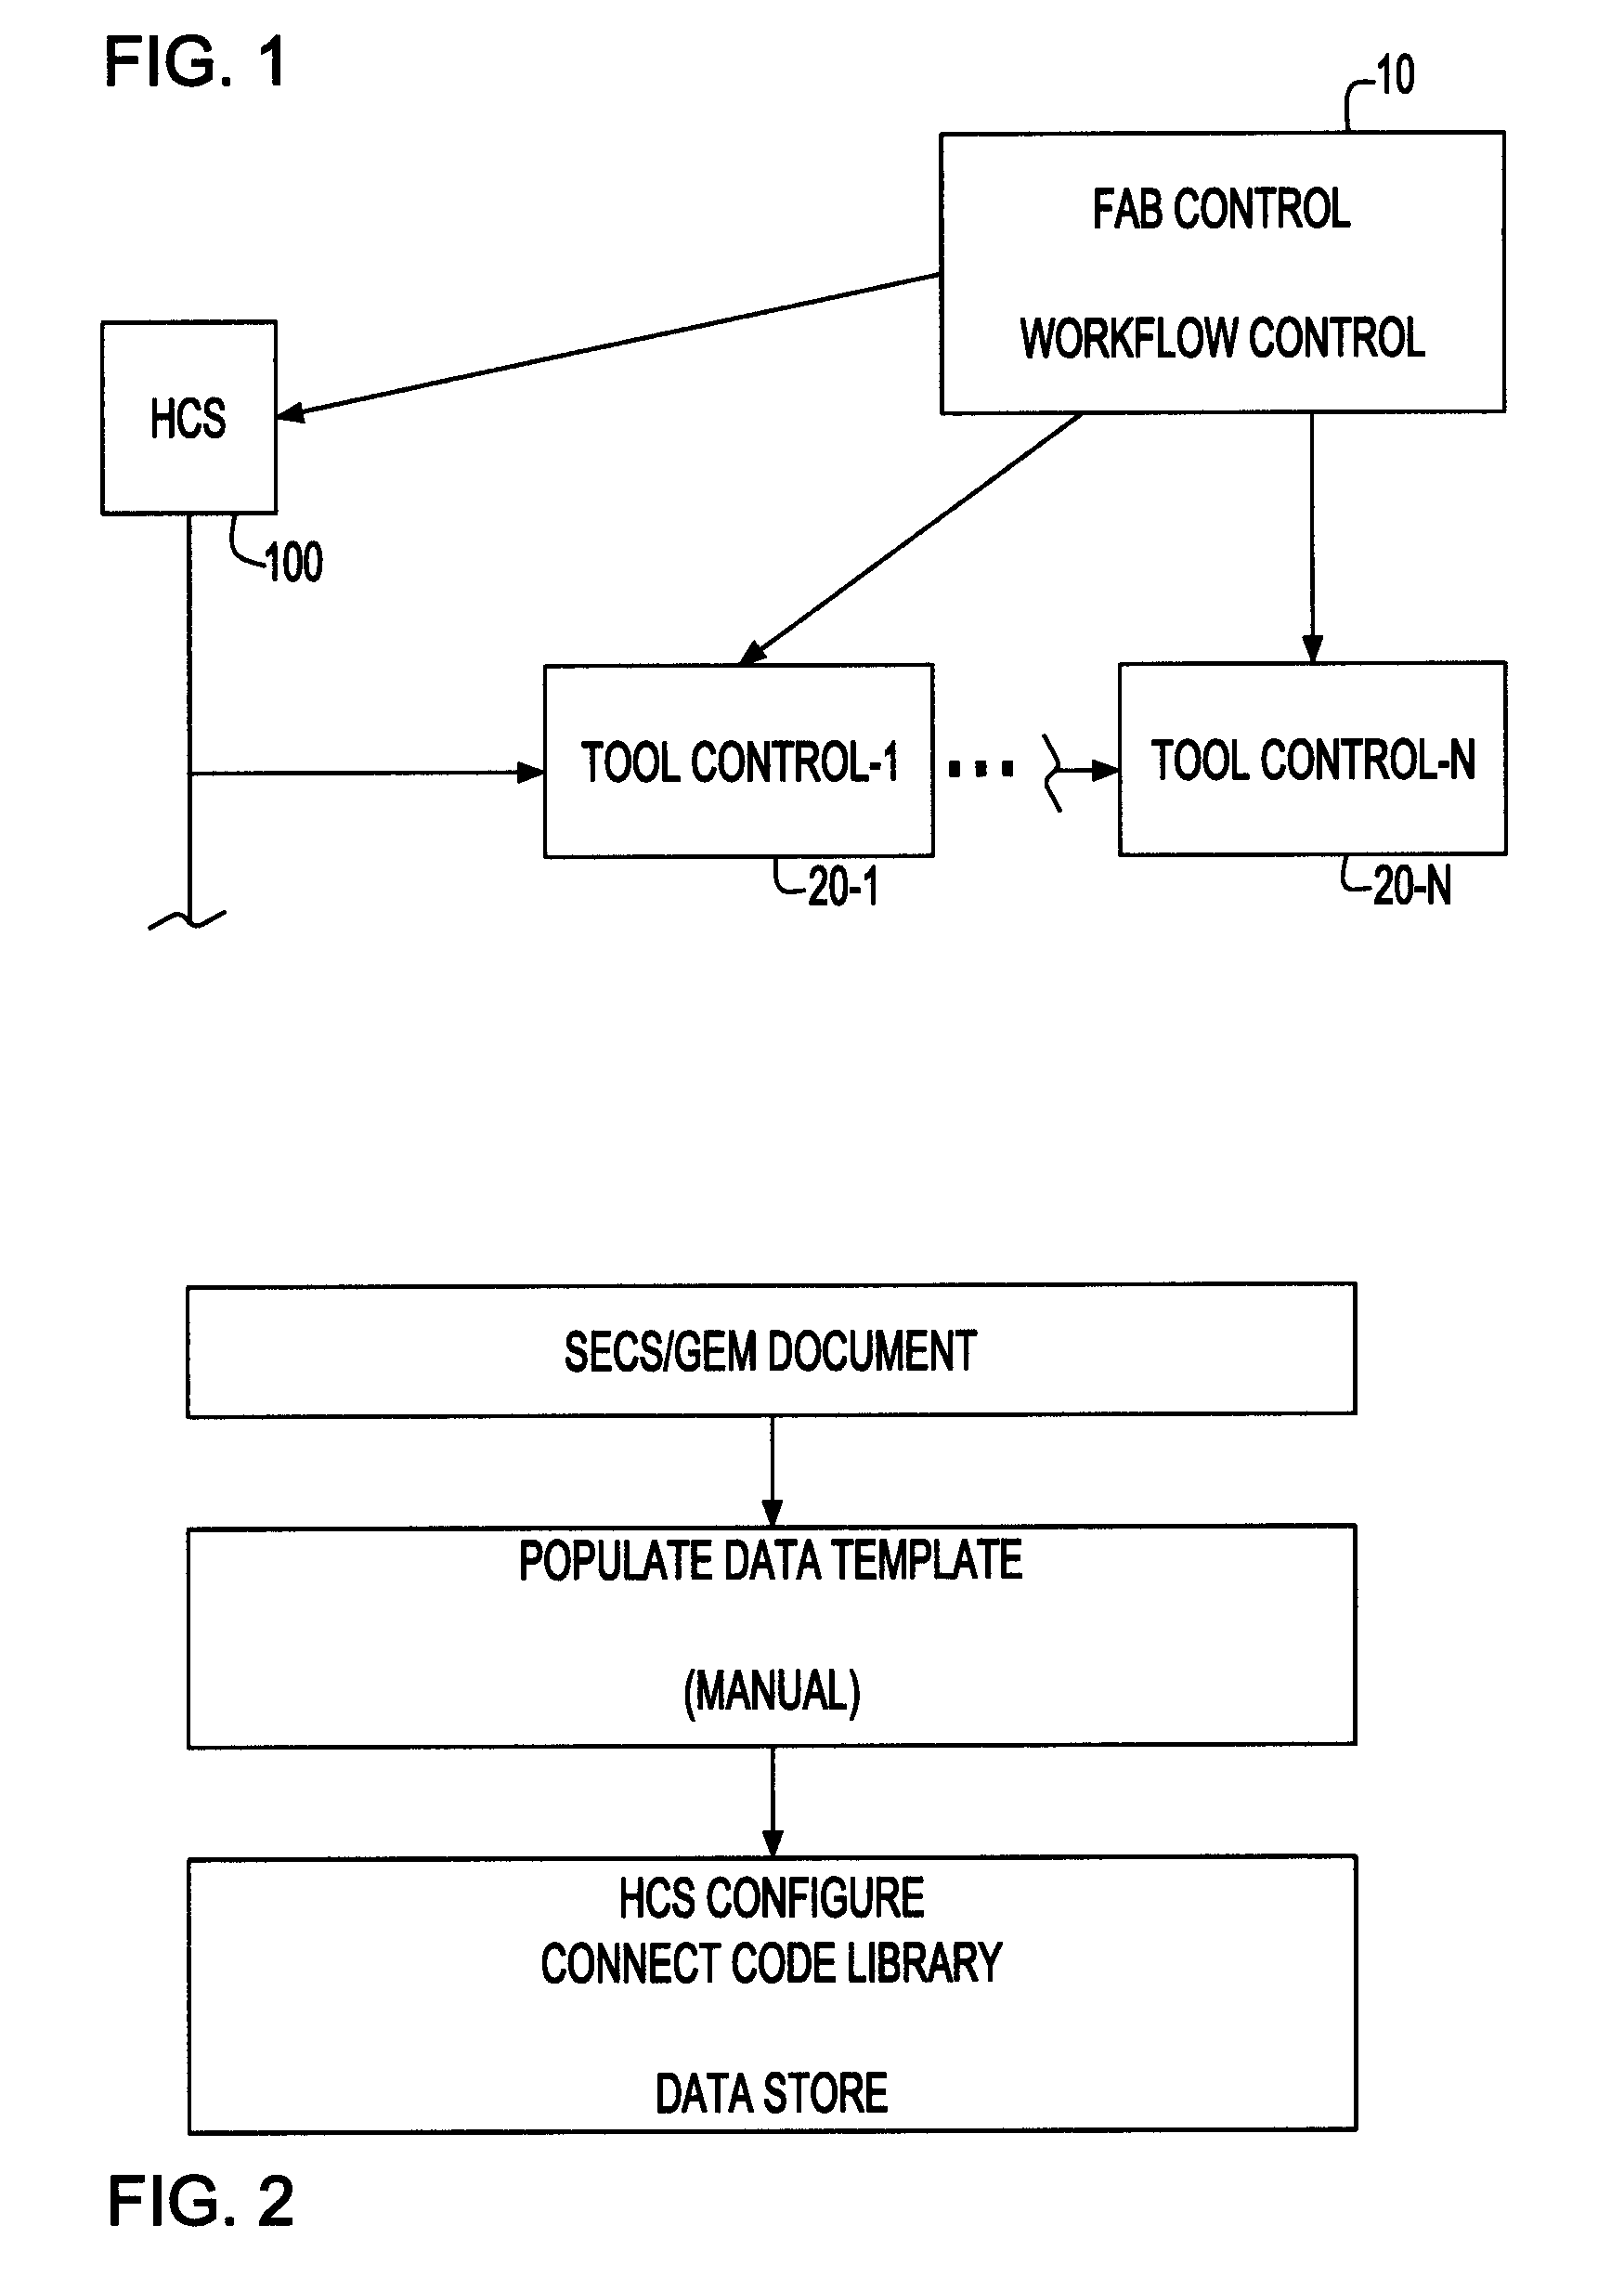 Host control for a variety of tools in semiconductor fabs